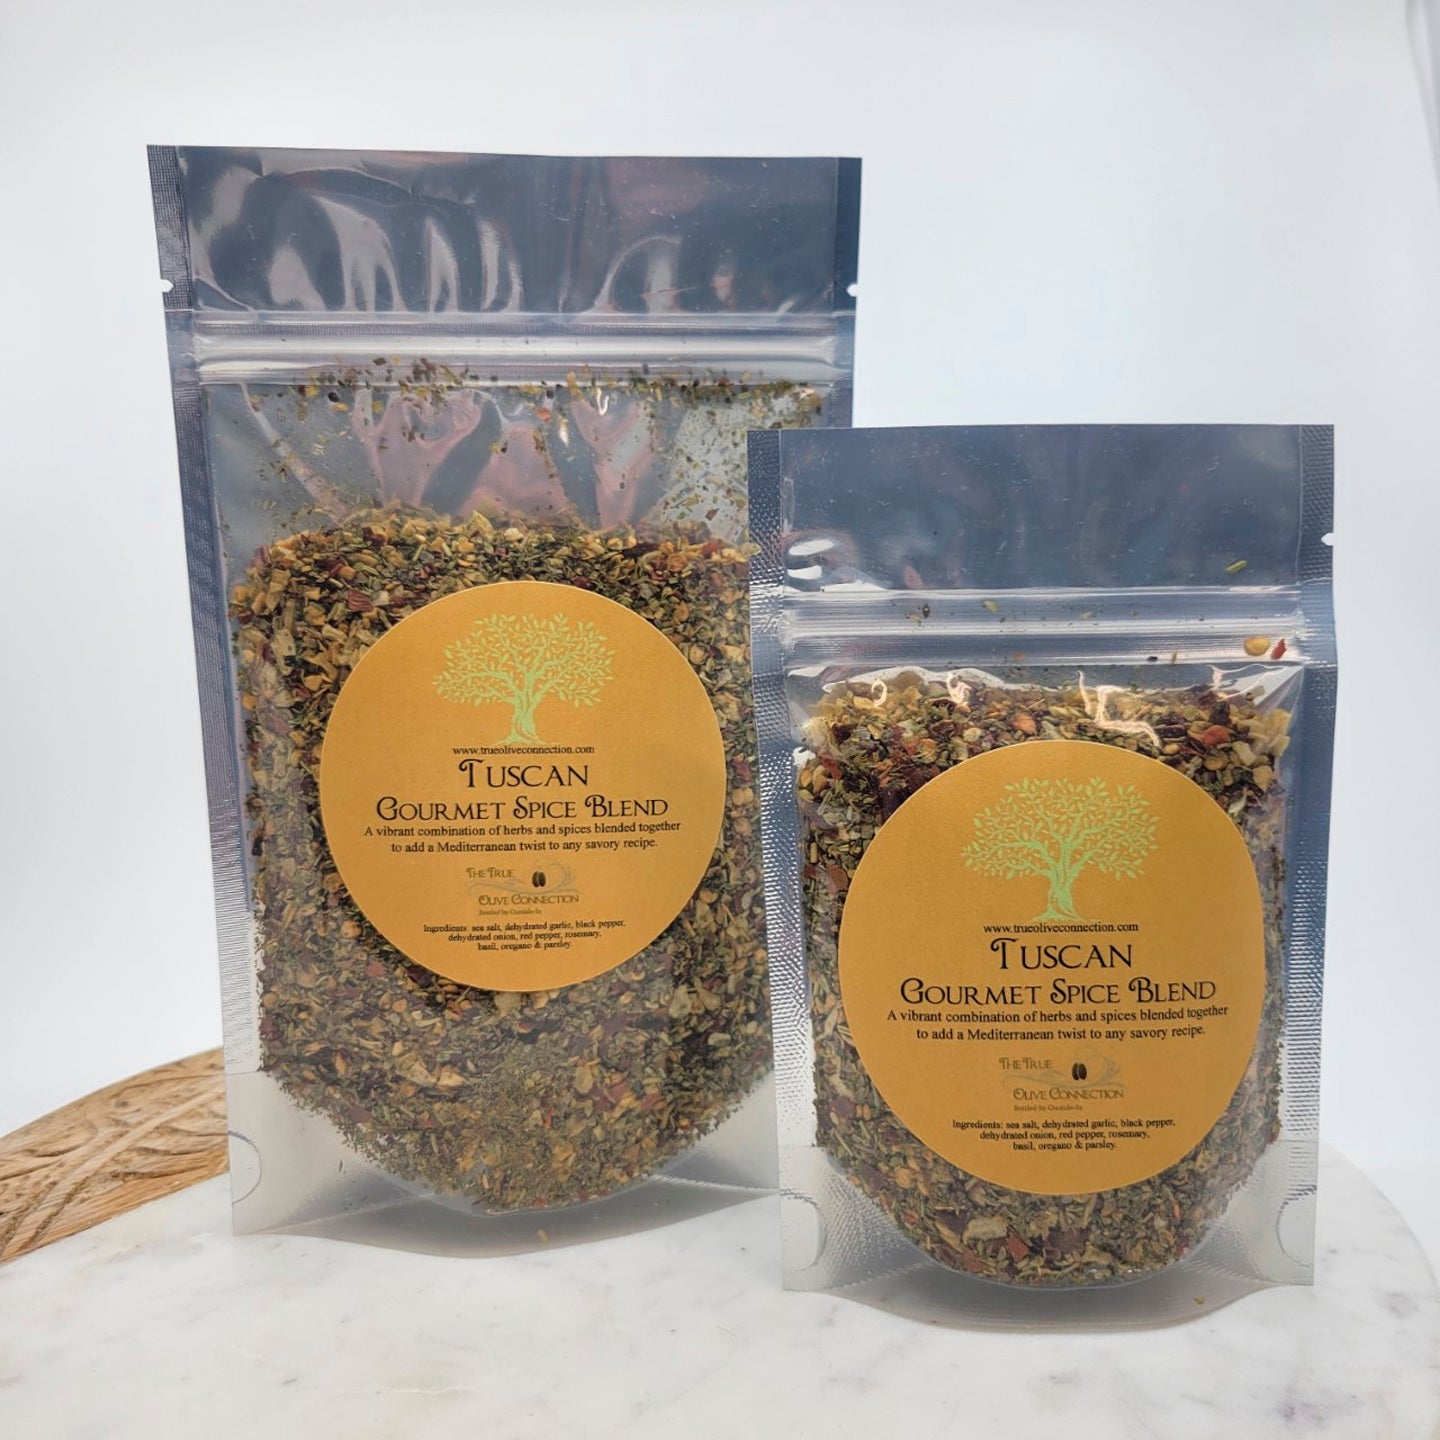 Tuscan Gourmet Spice Blend